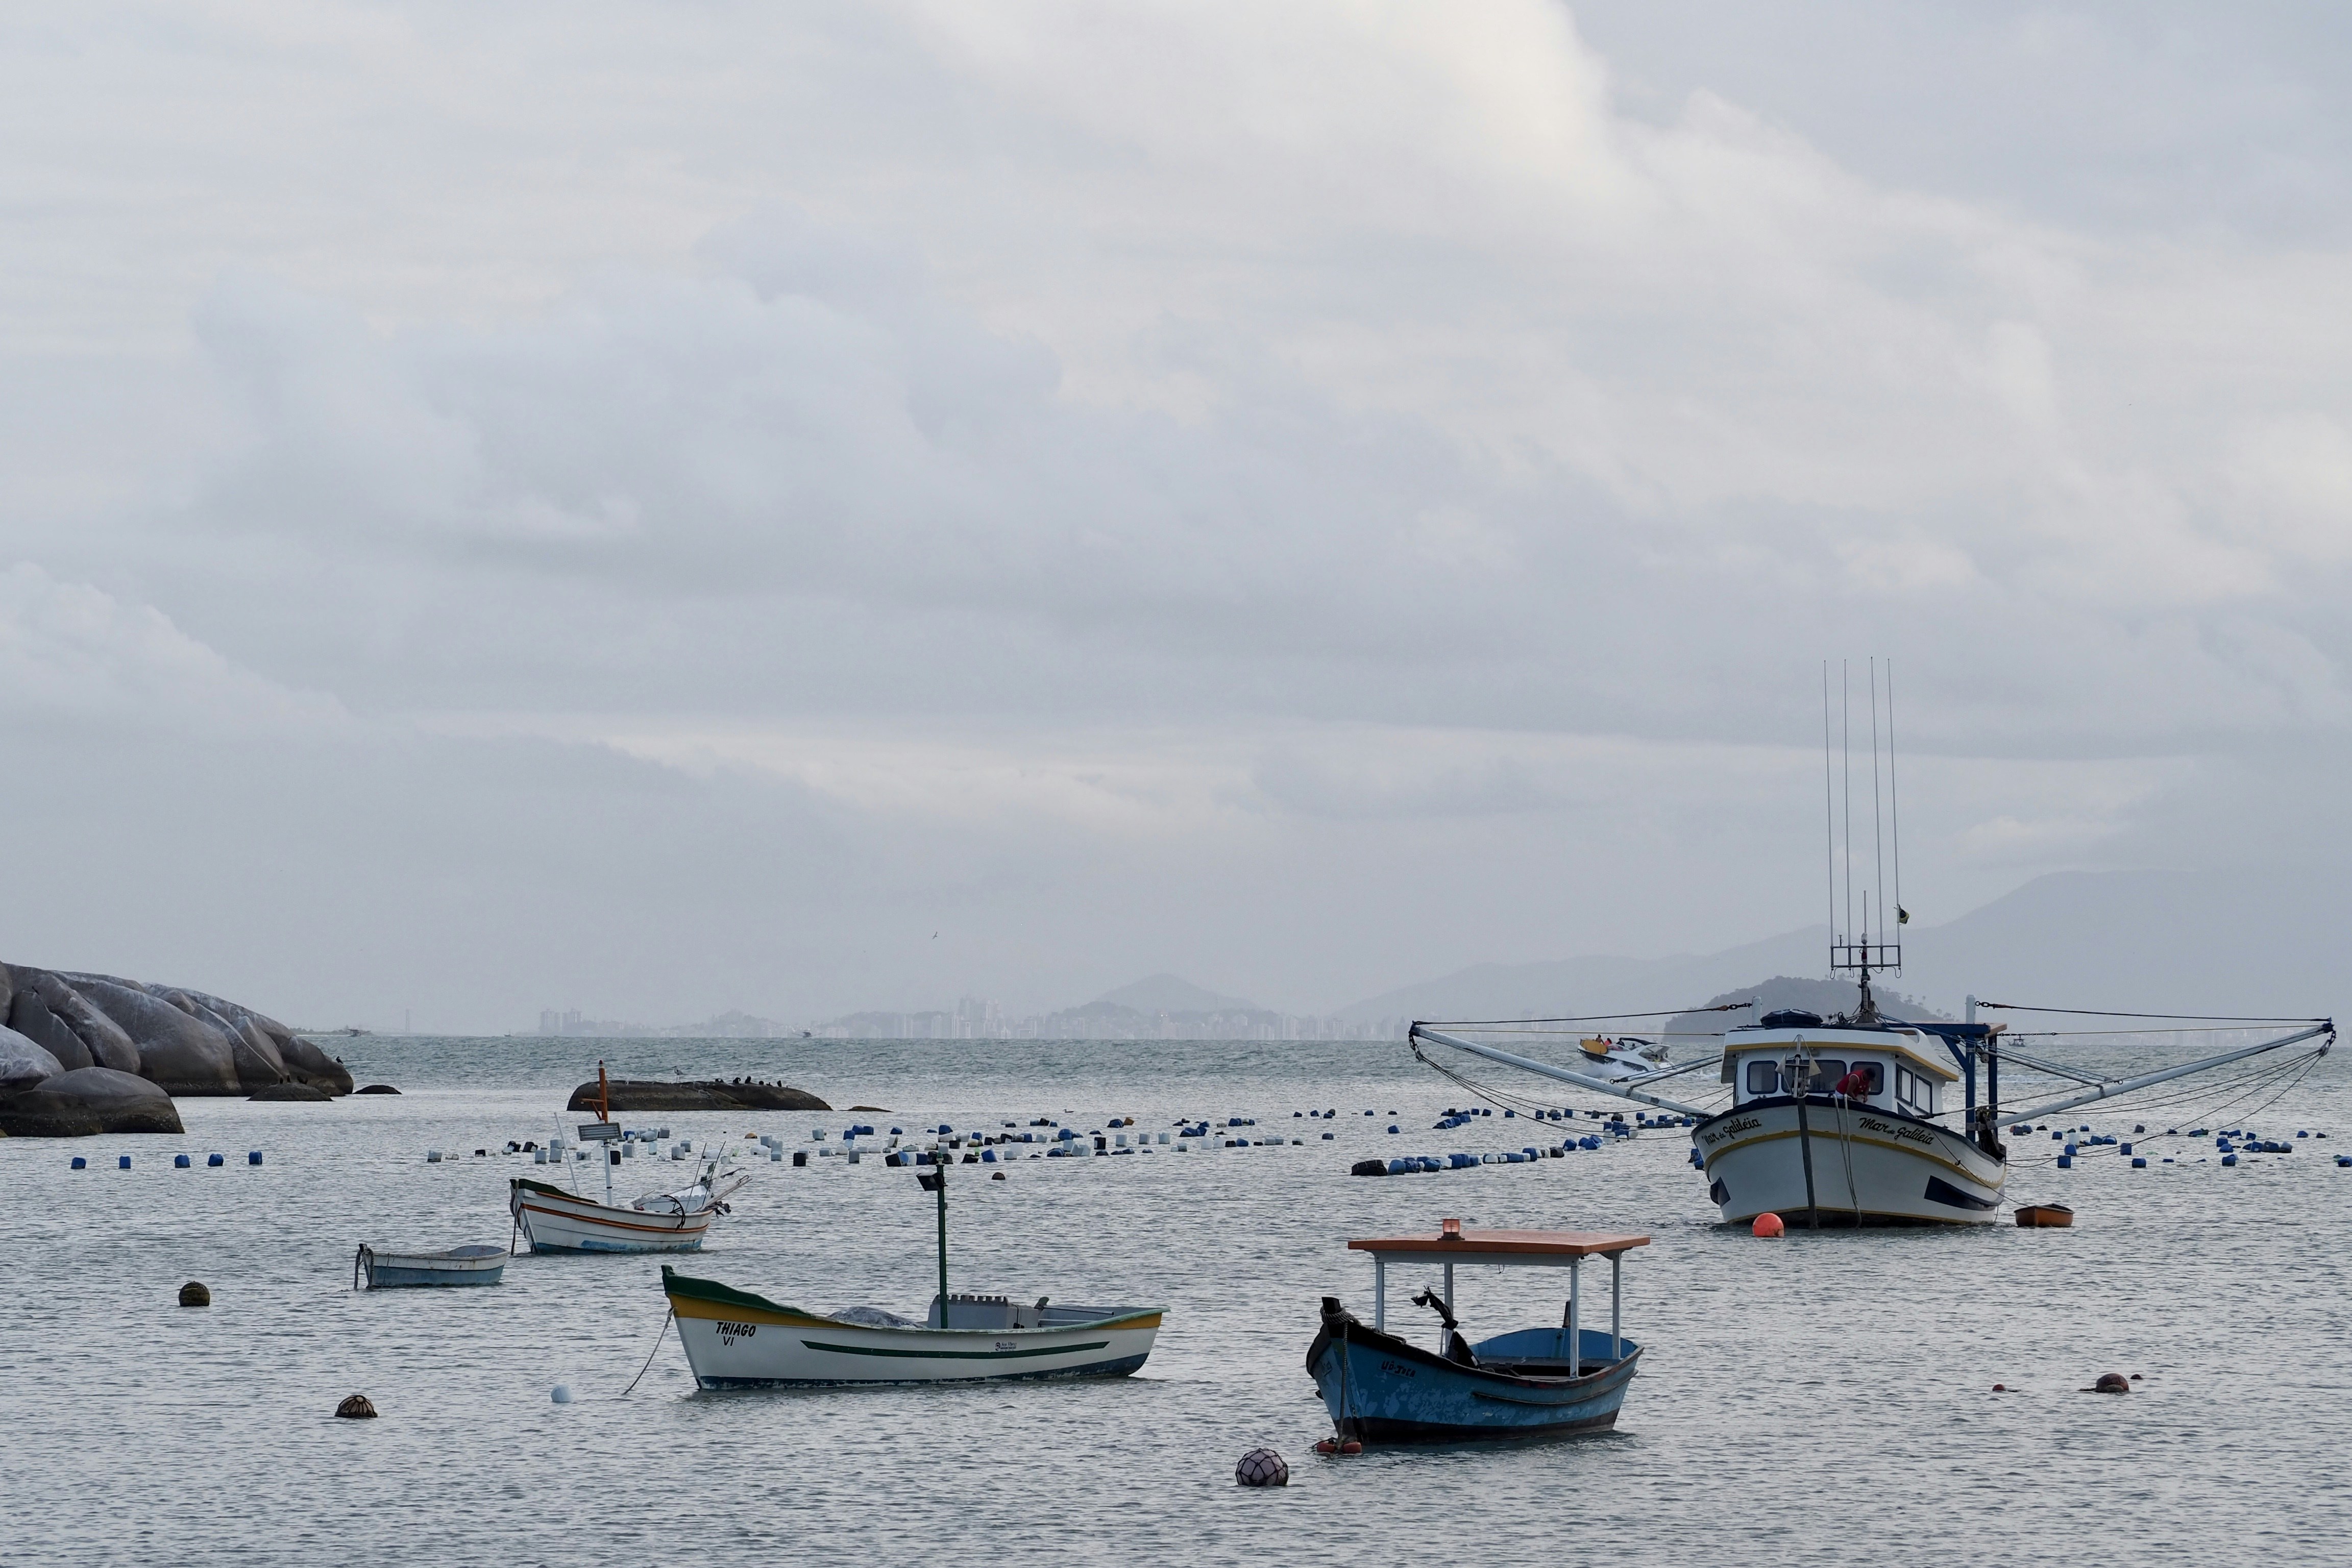 Small ship and boats on a cloudy day in Santa Catarina